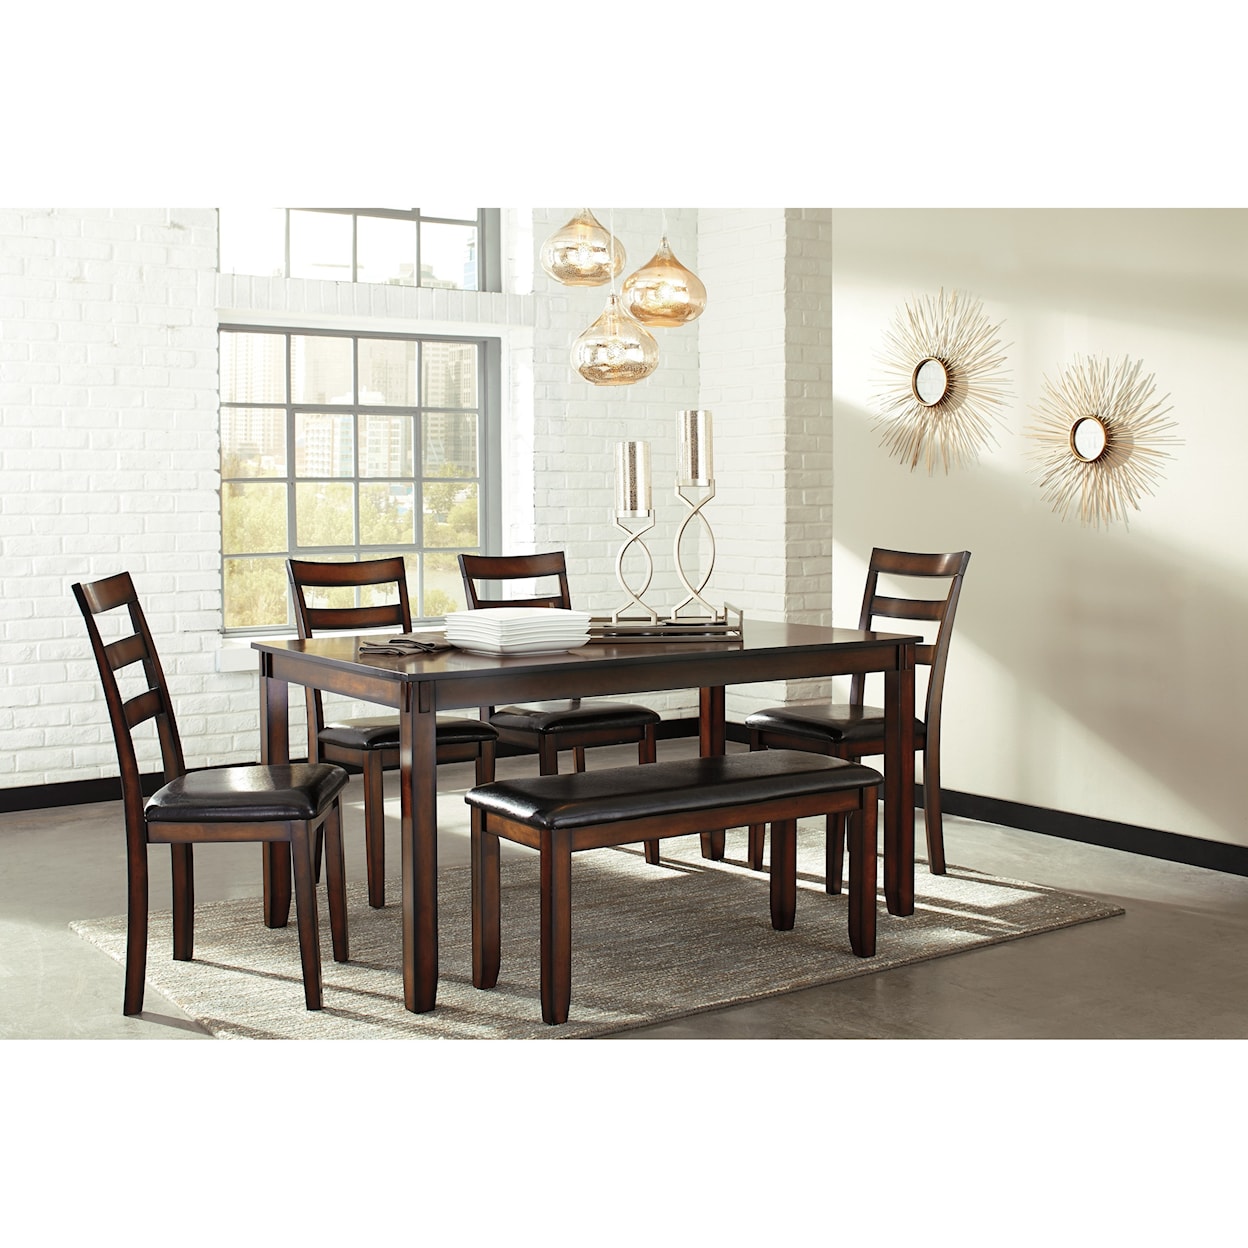 Signature Design by Ashley Coviar 6pc Dining Room Group